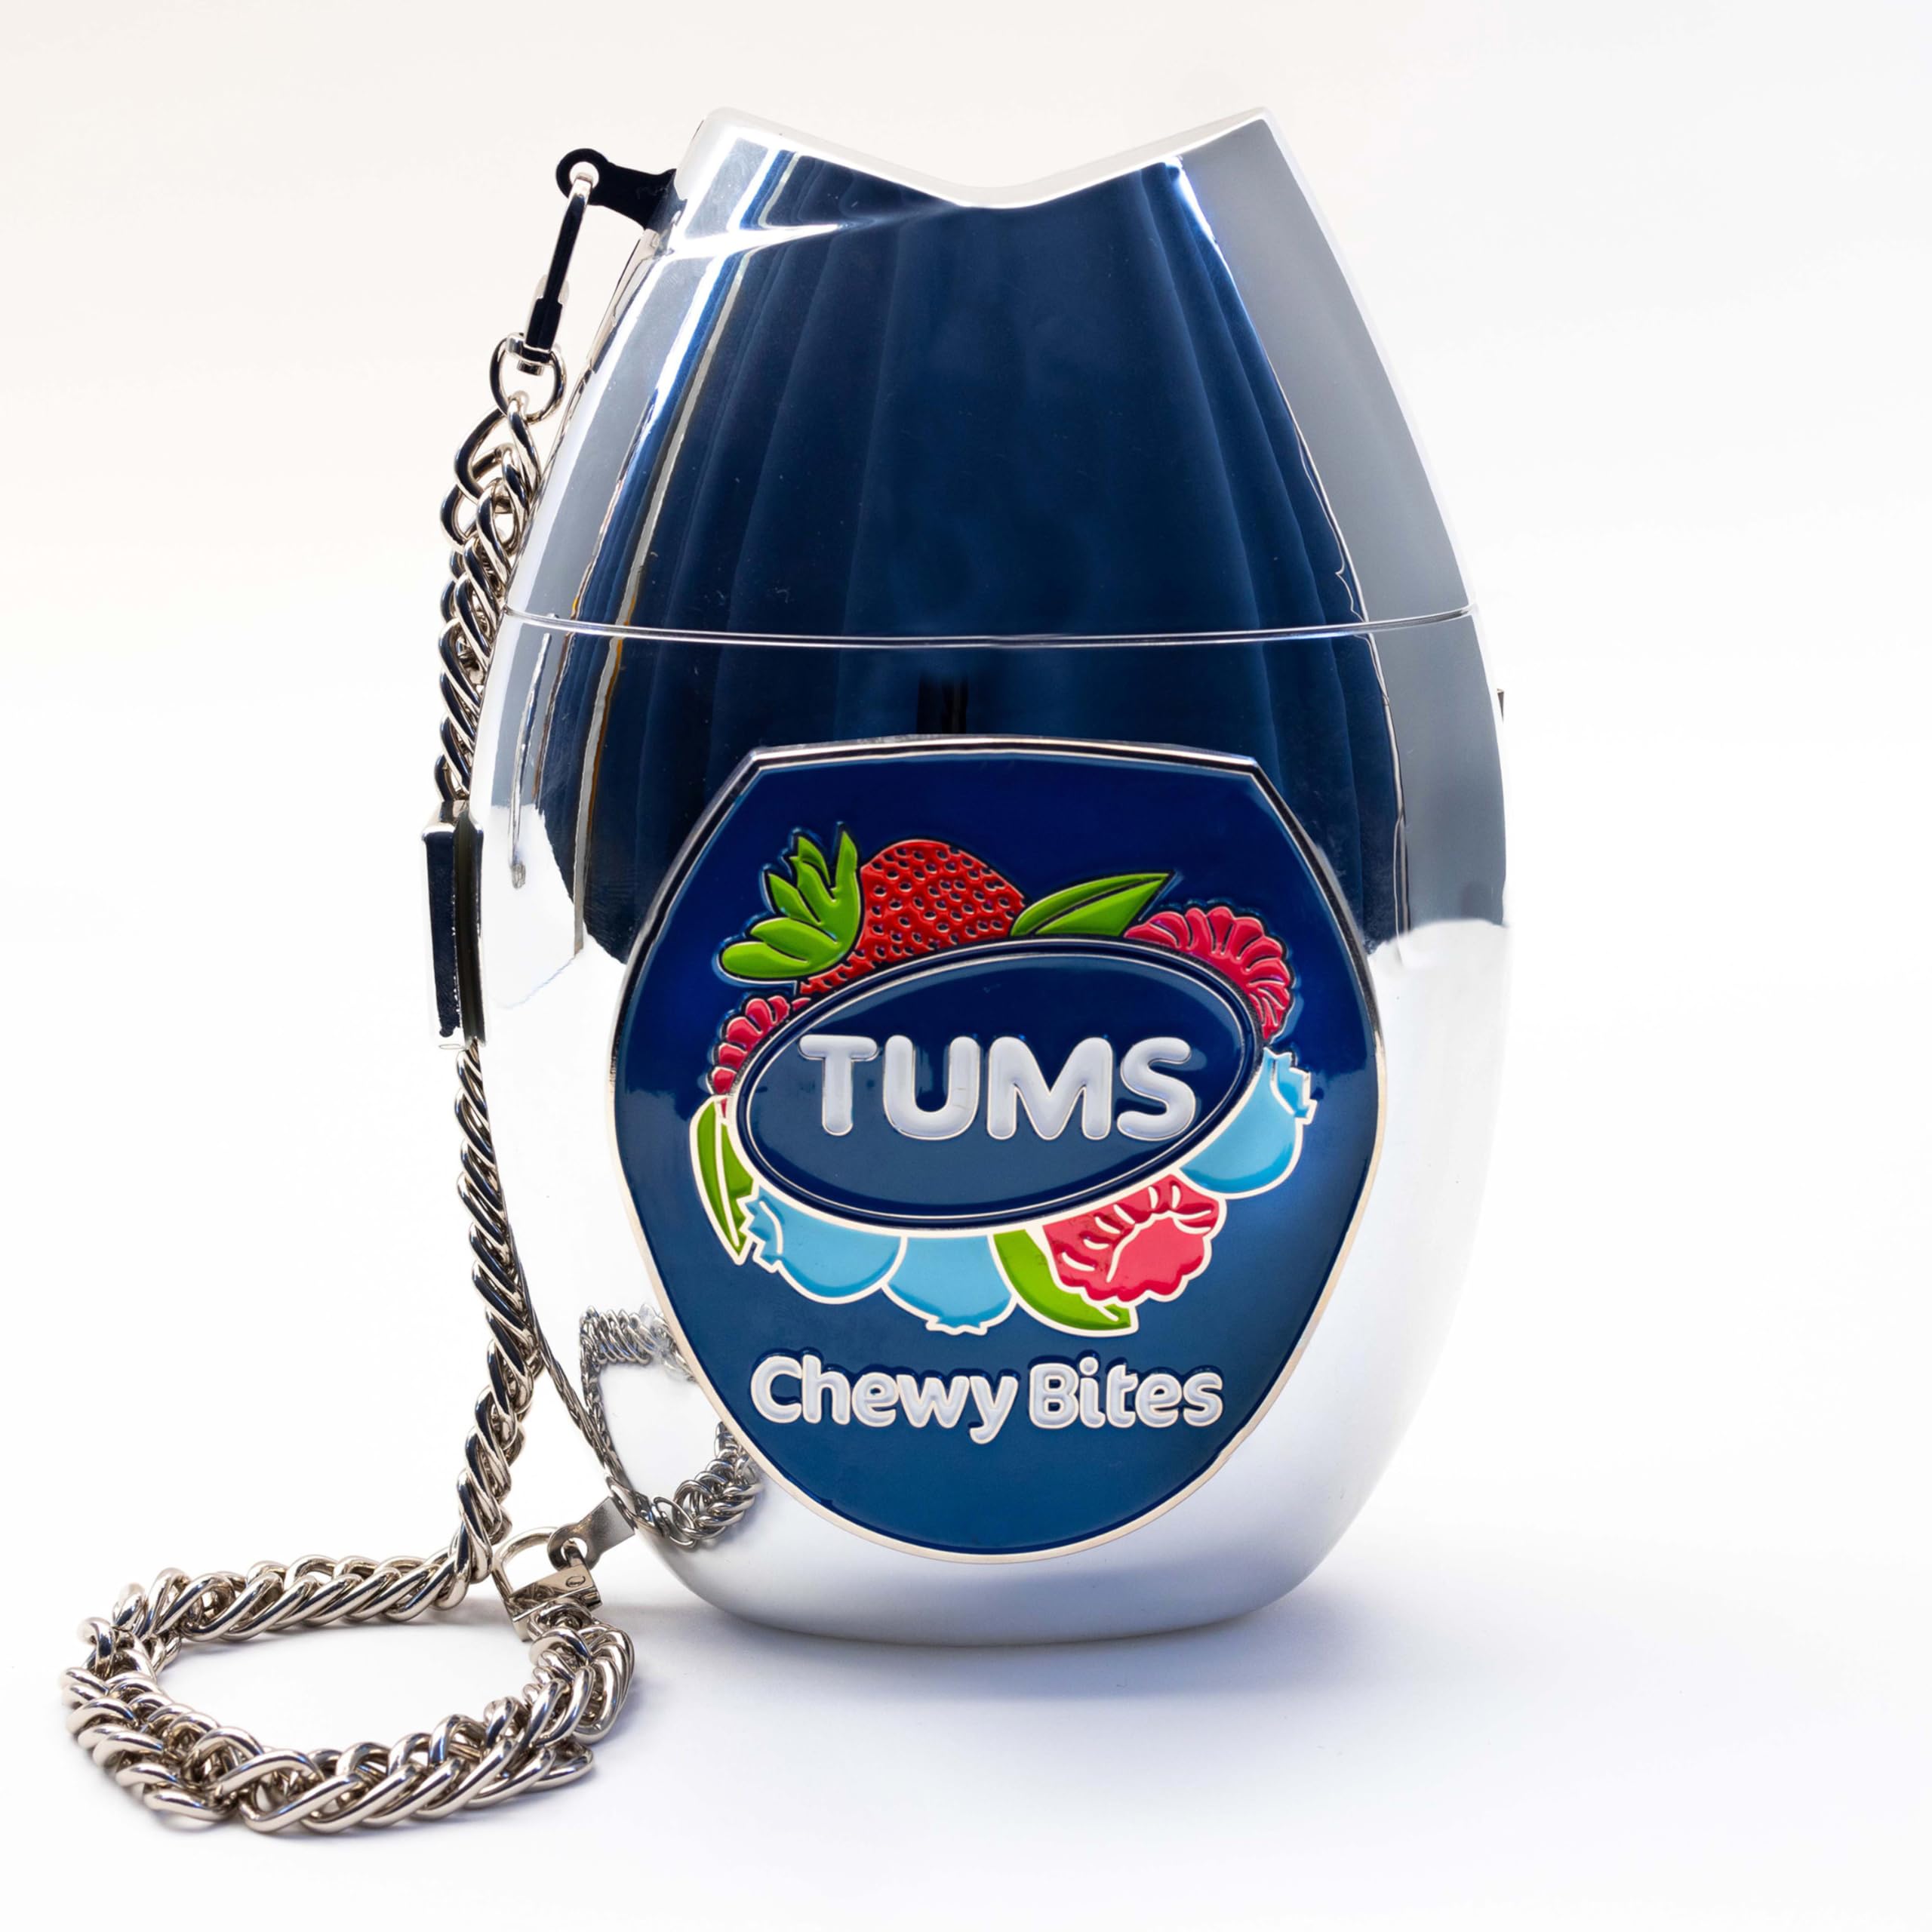 TUMS Limited Edition Bag by Nik Bentel